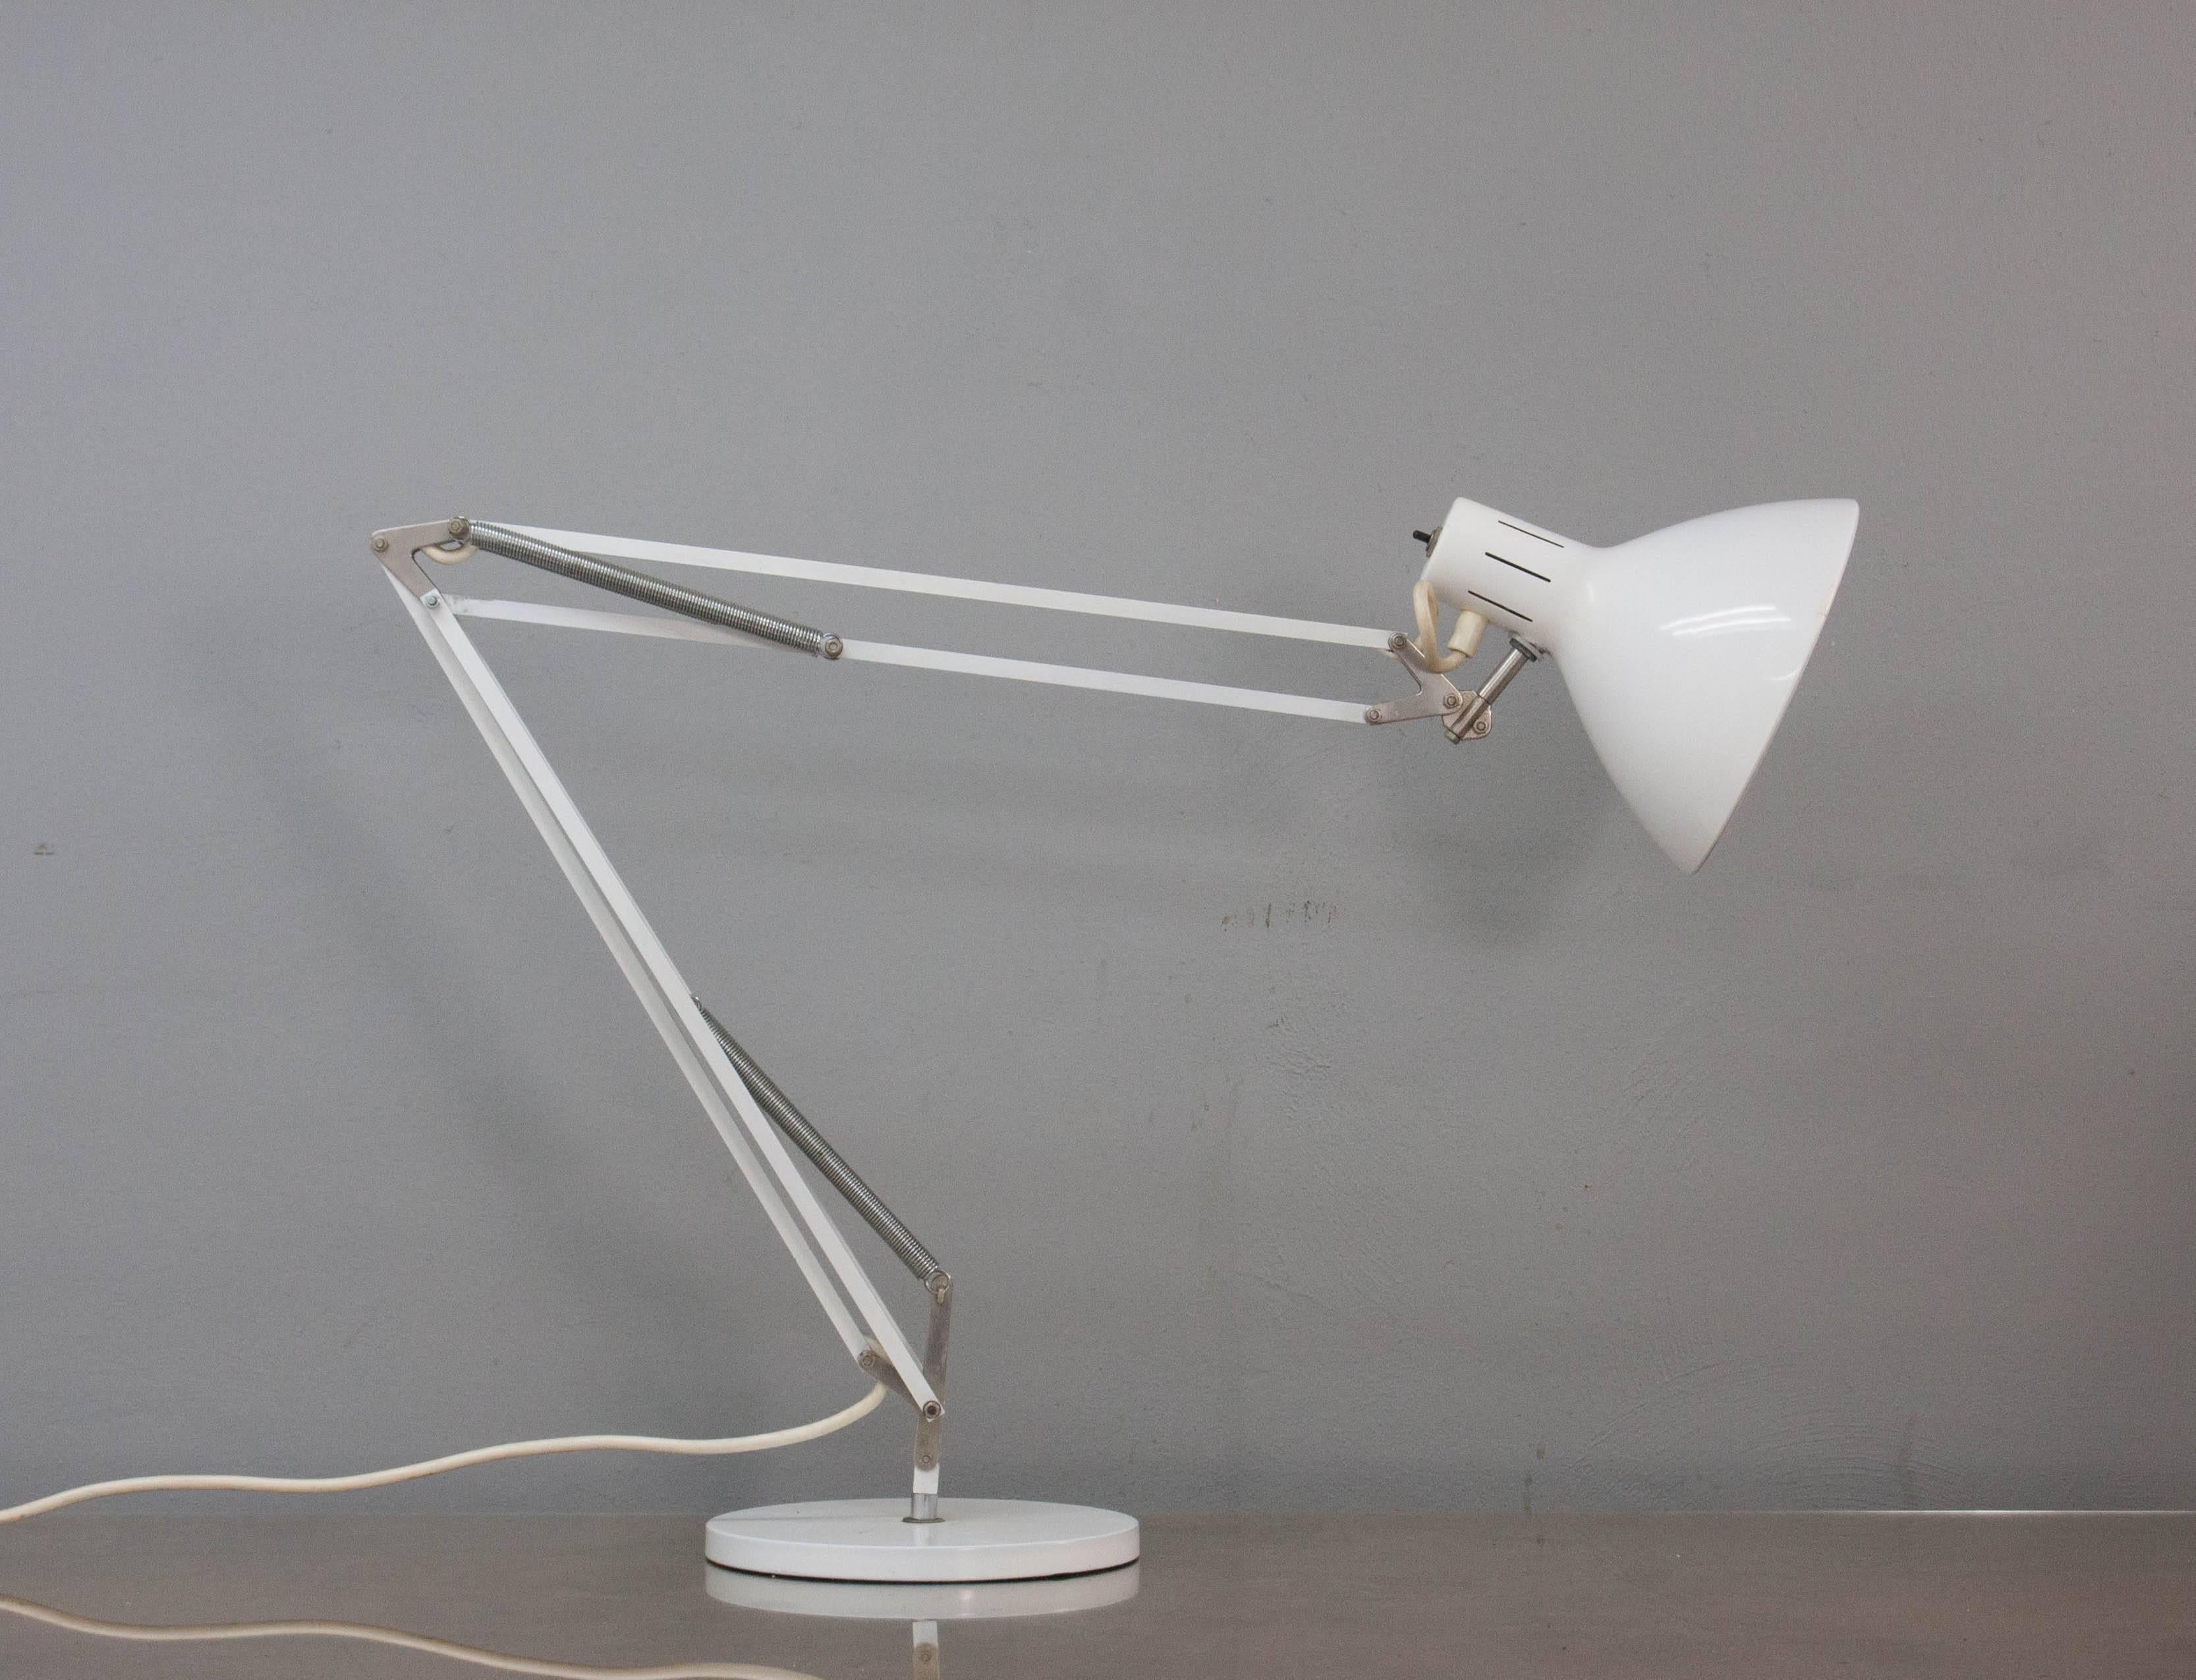 Large midcentury industrial desk lamp designed by H. Th. J. A. Busquet for Dutch lighting specialists Hala Zeist. White lacquered metal on a weighted base.